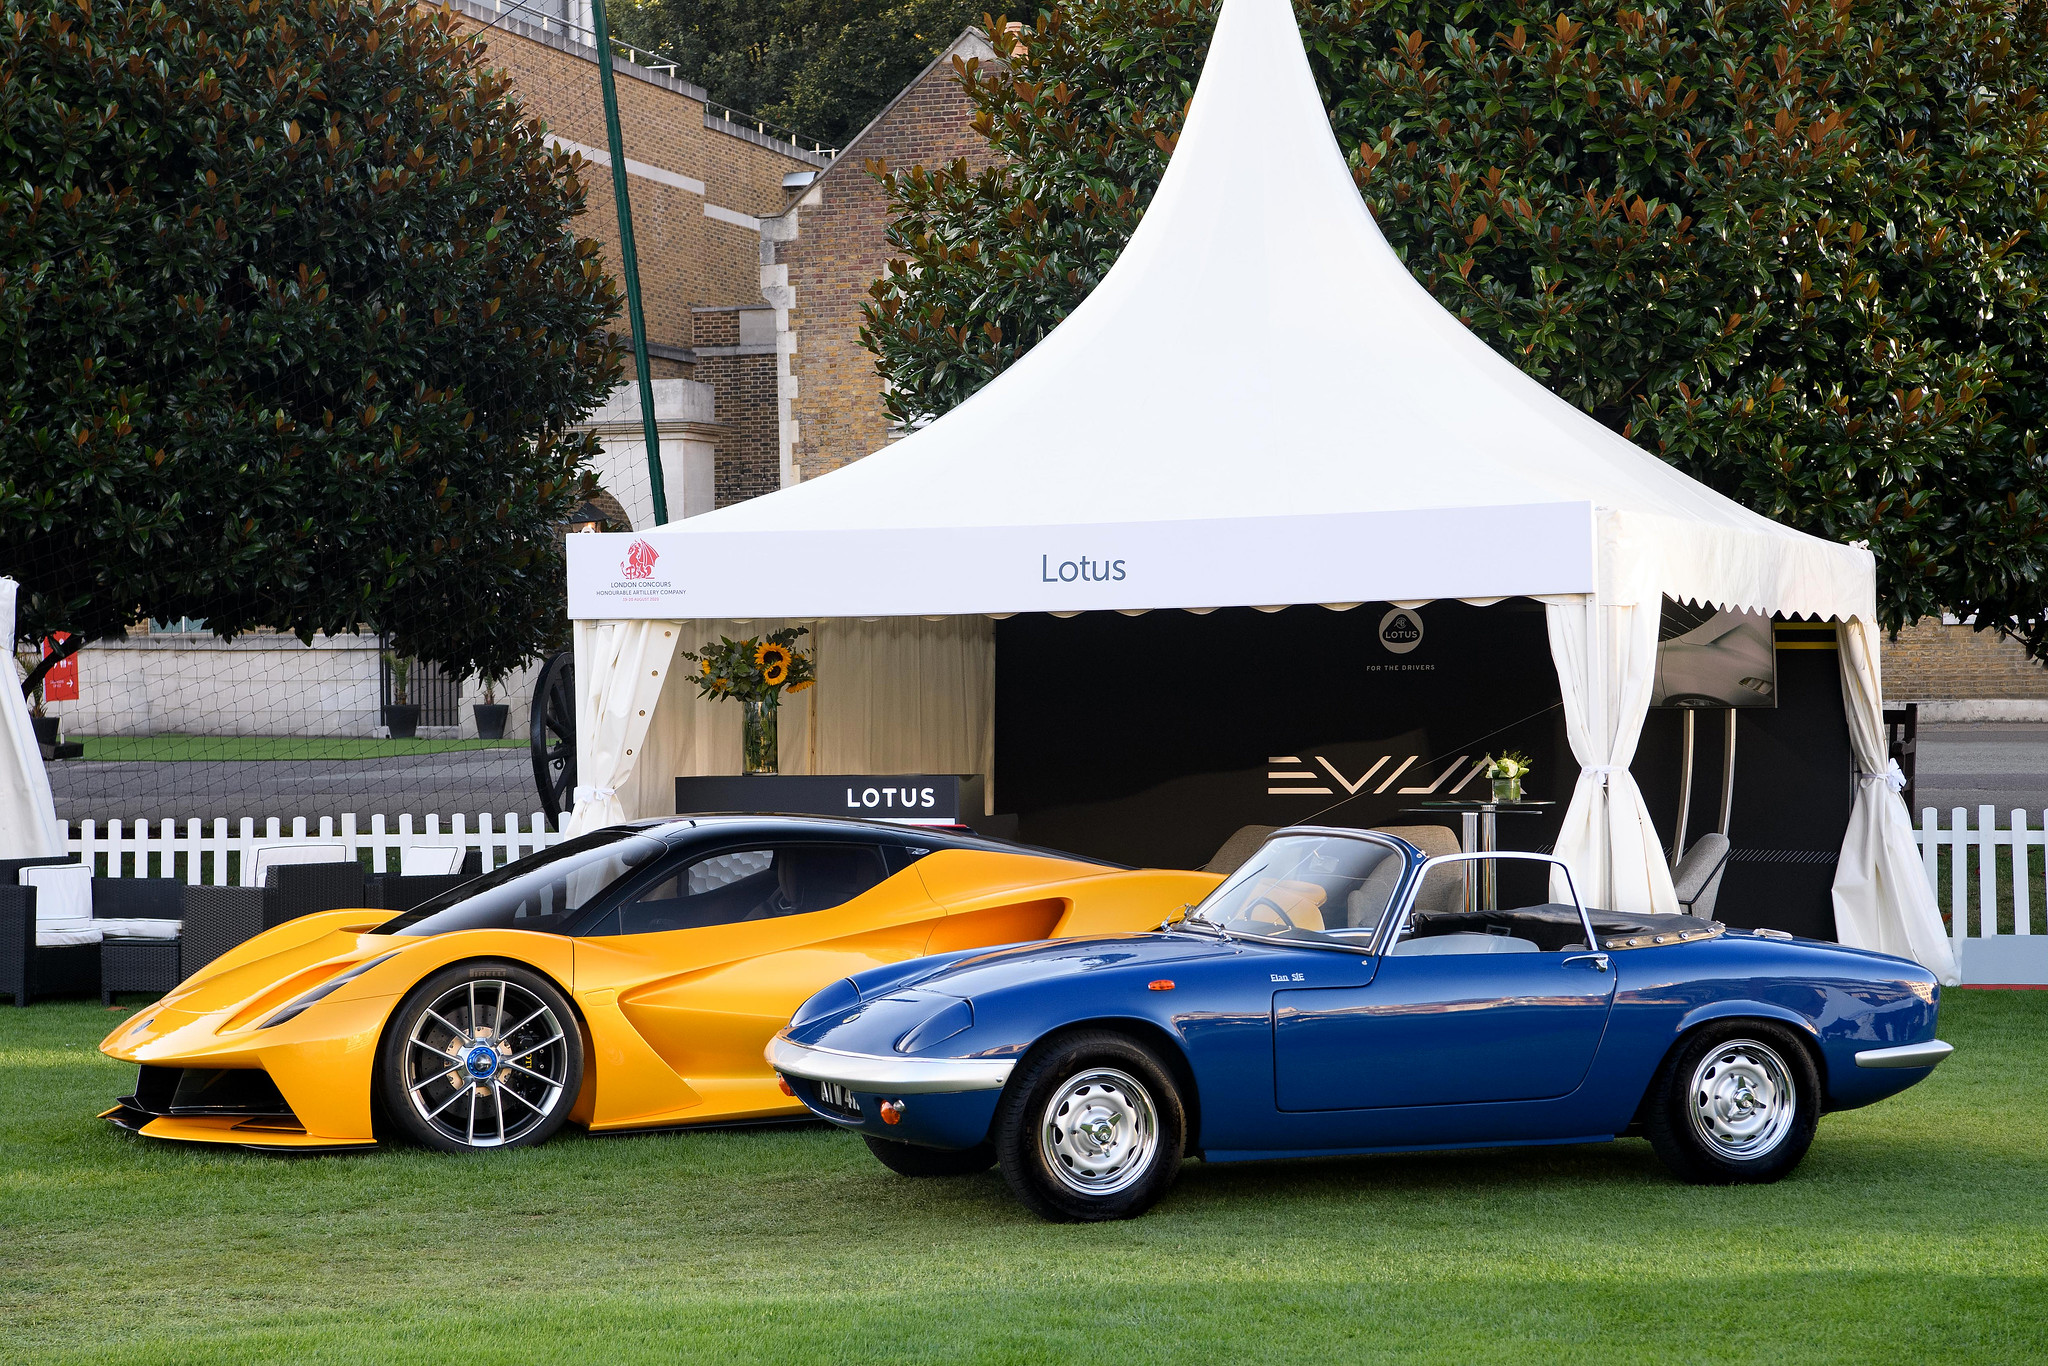 London Concours Celebrates Lotus in the ‘Great Marques: Lotus’ Class